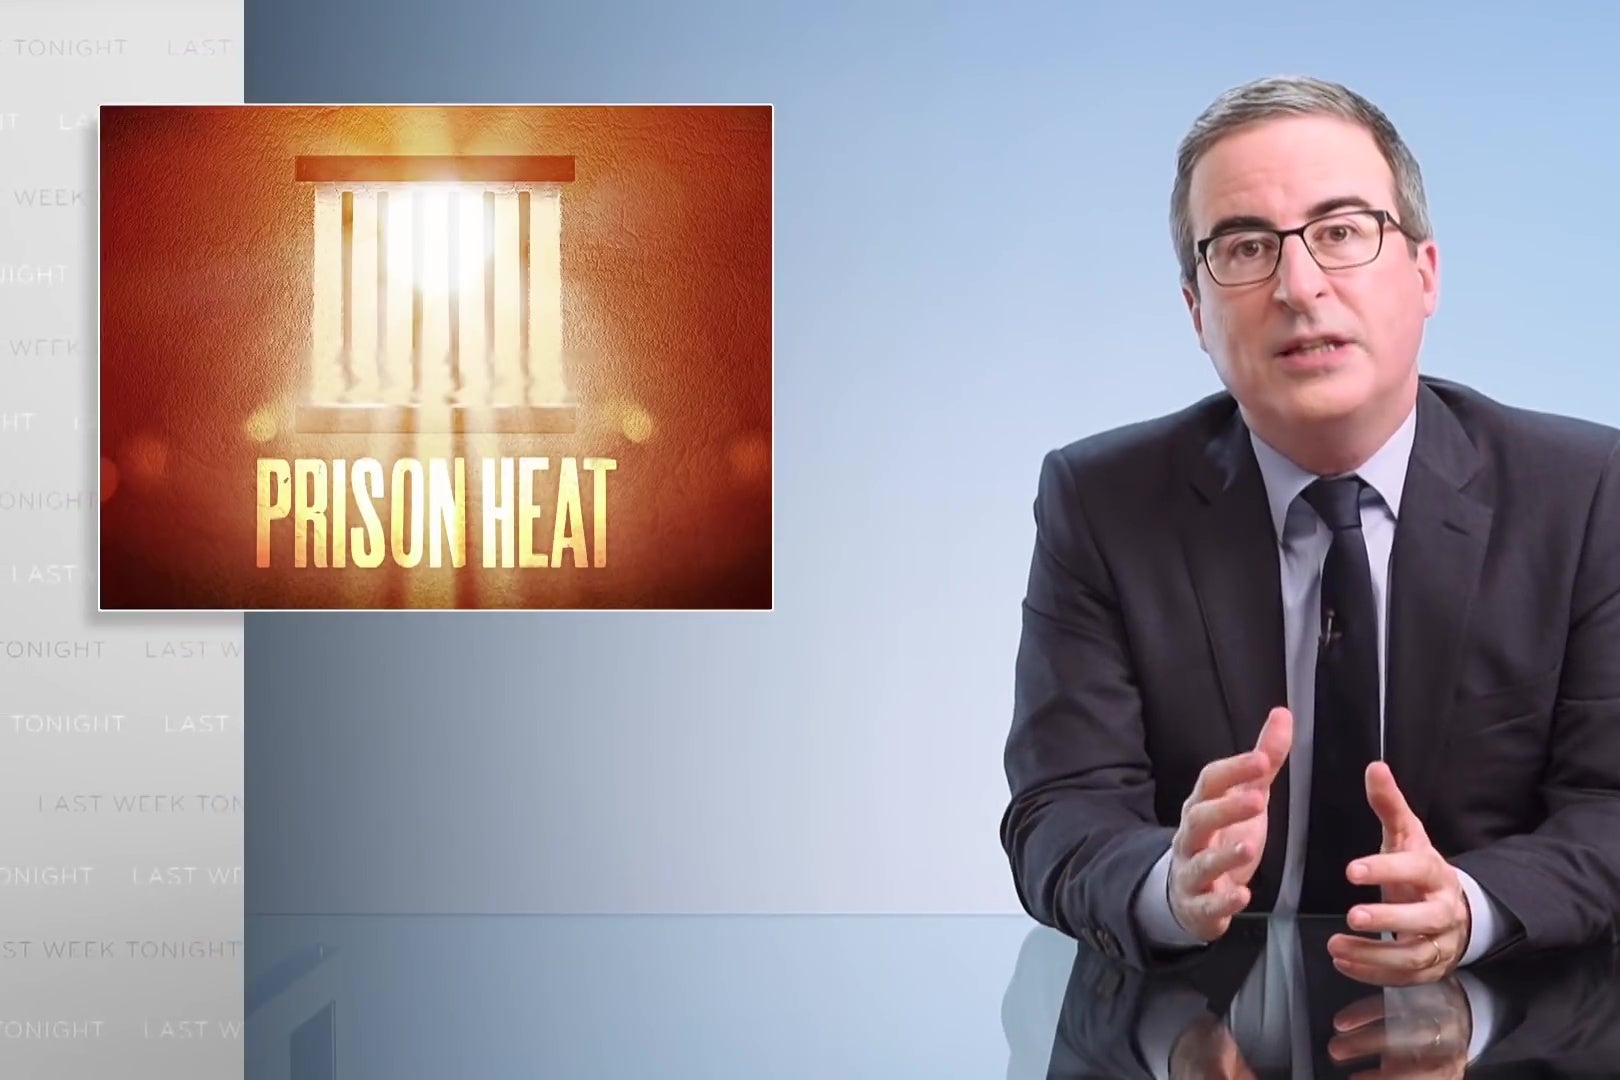 John Oliver sits at a glass anchorperson's desk, in front of an image that is labeled "Prison Heat."